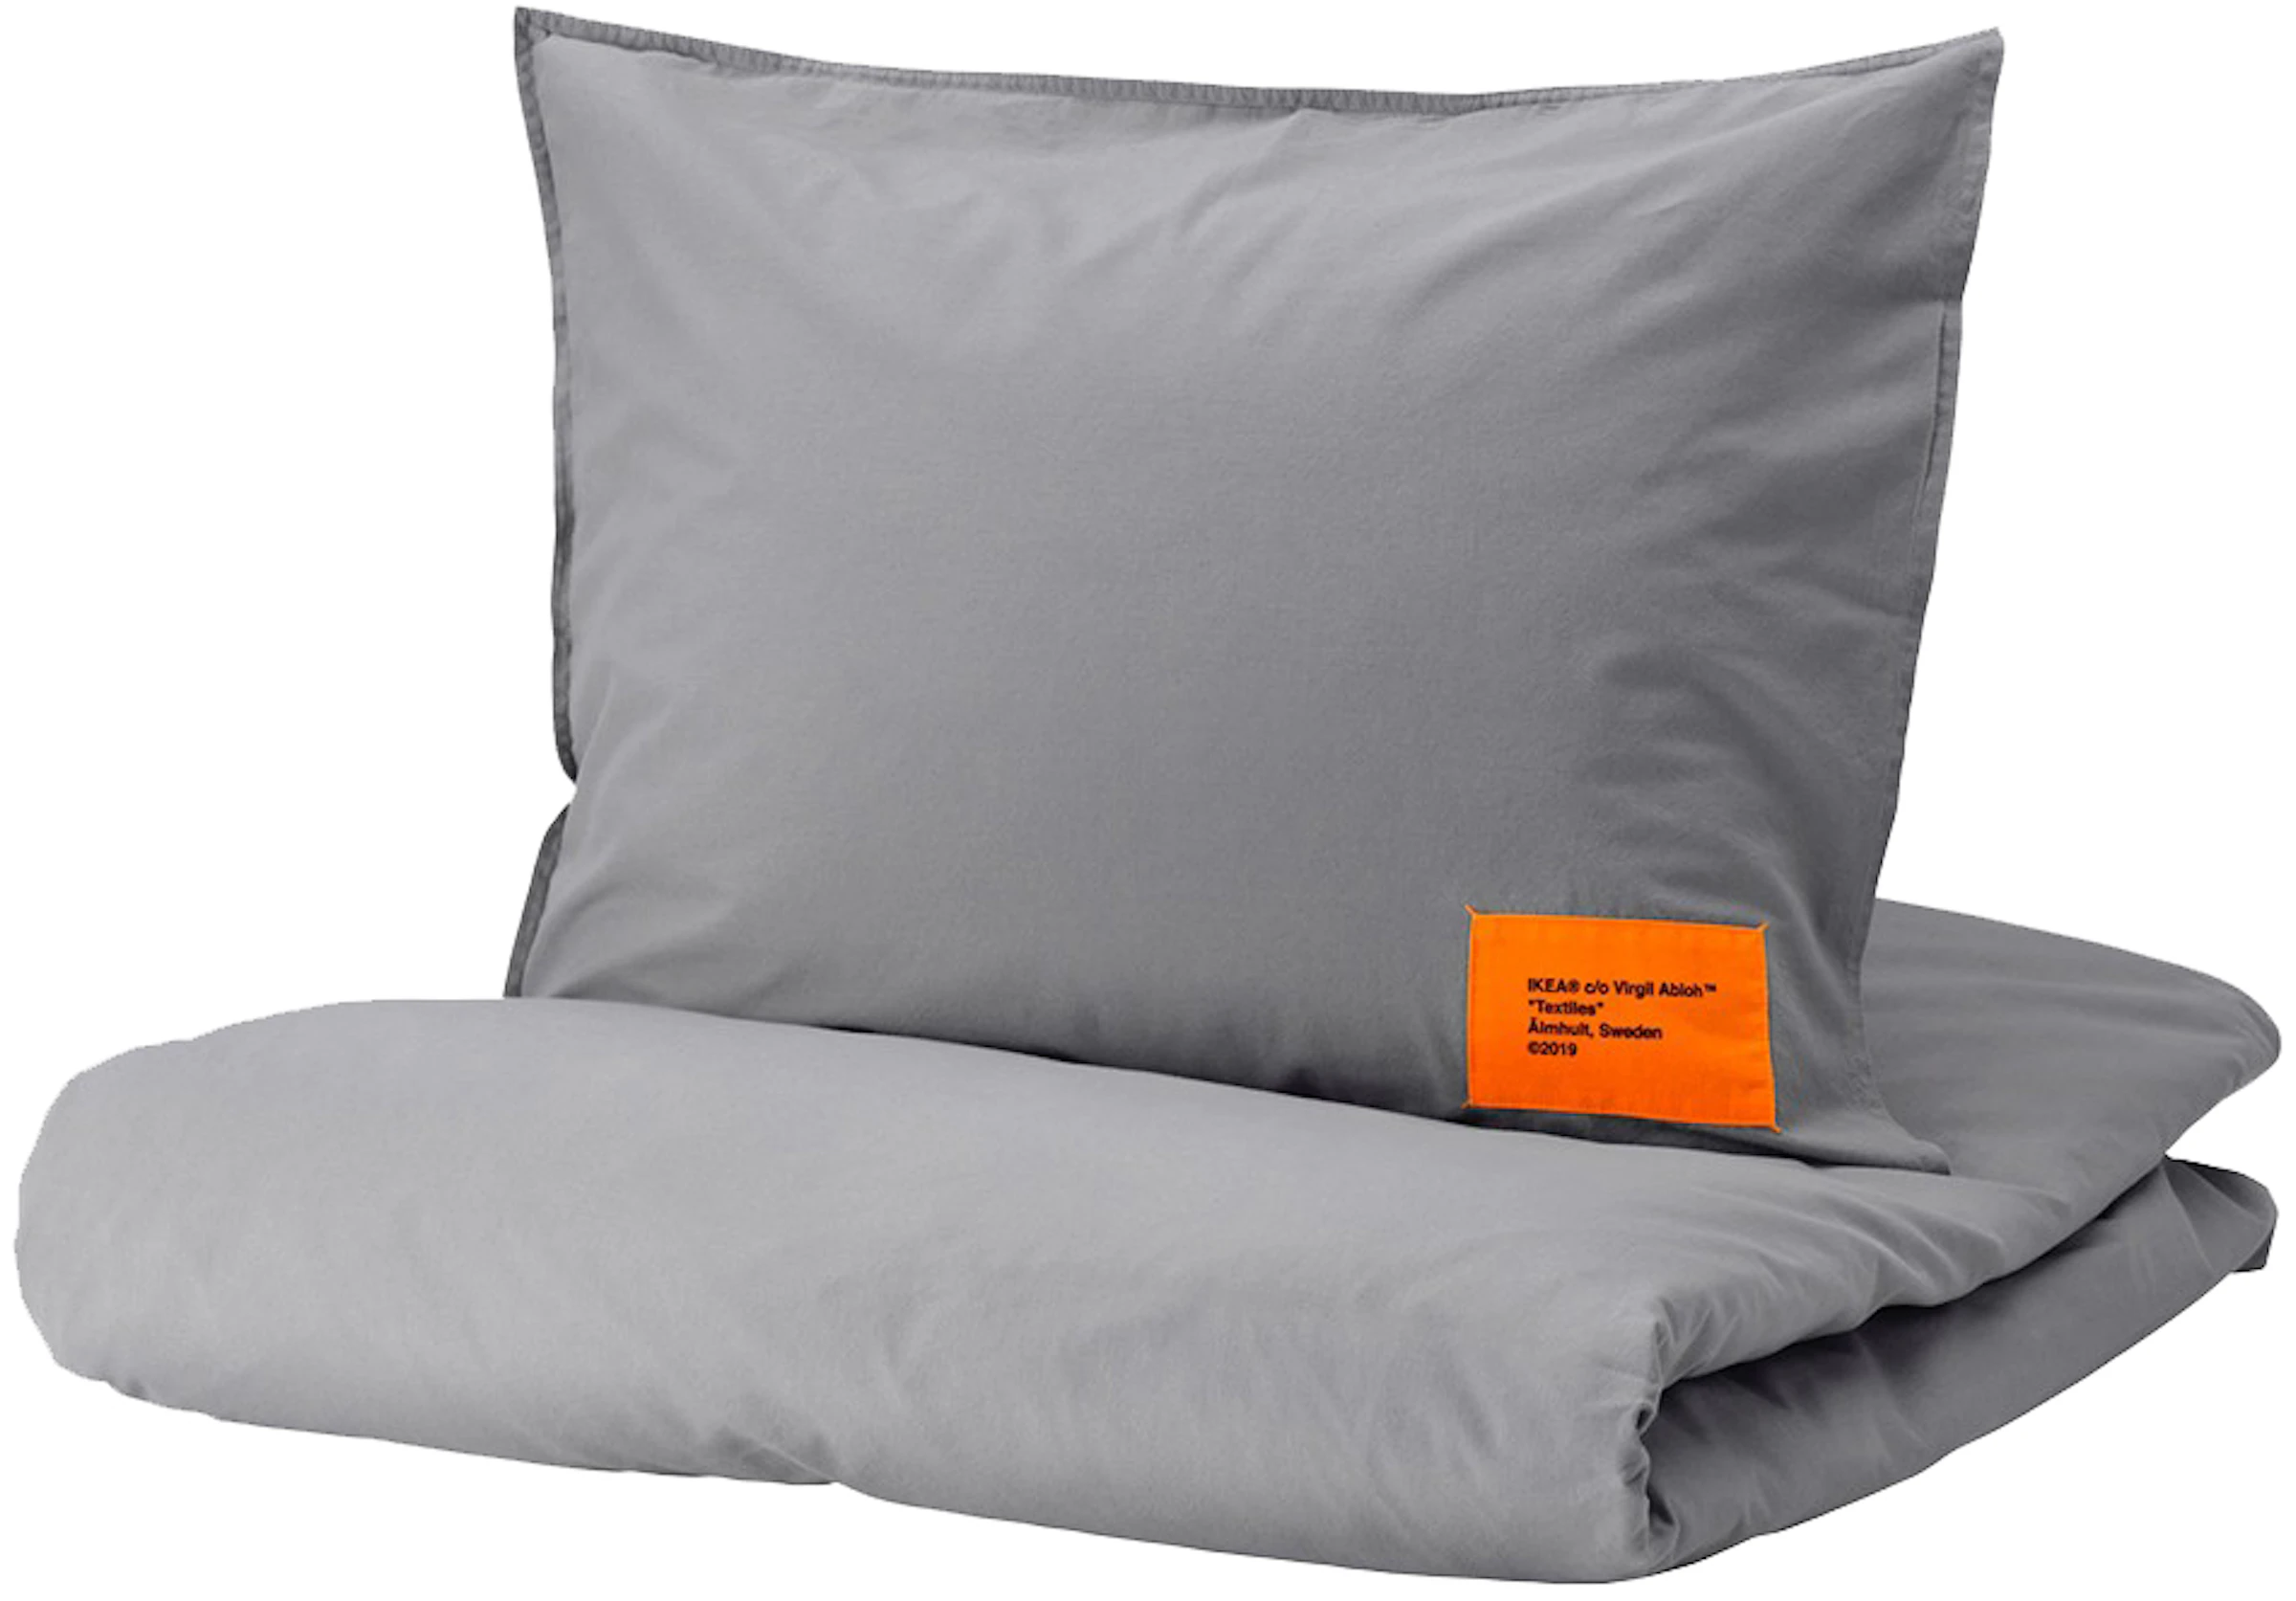 Tochi boom Vaccineren houder Virgil Abloh x IKEA MARKERAD US Duvet Cover and 2 Pillowcases (Full/Queen)  Gray - US